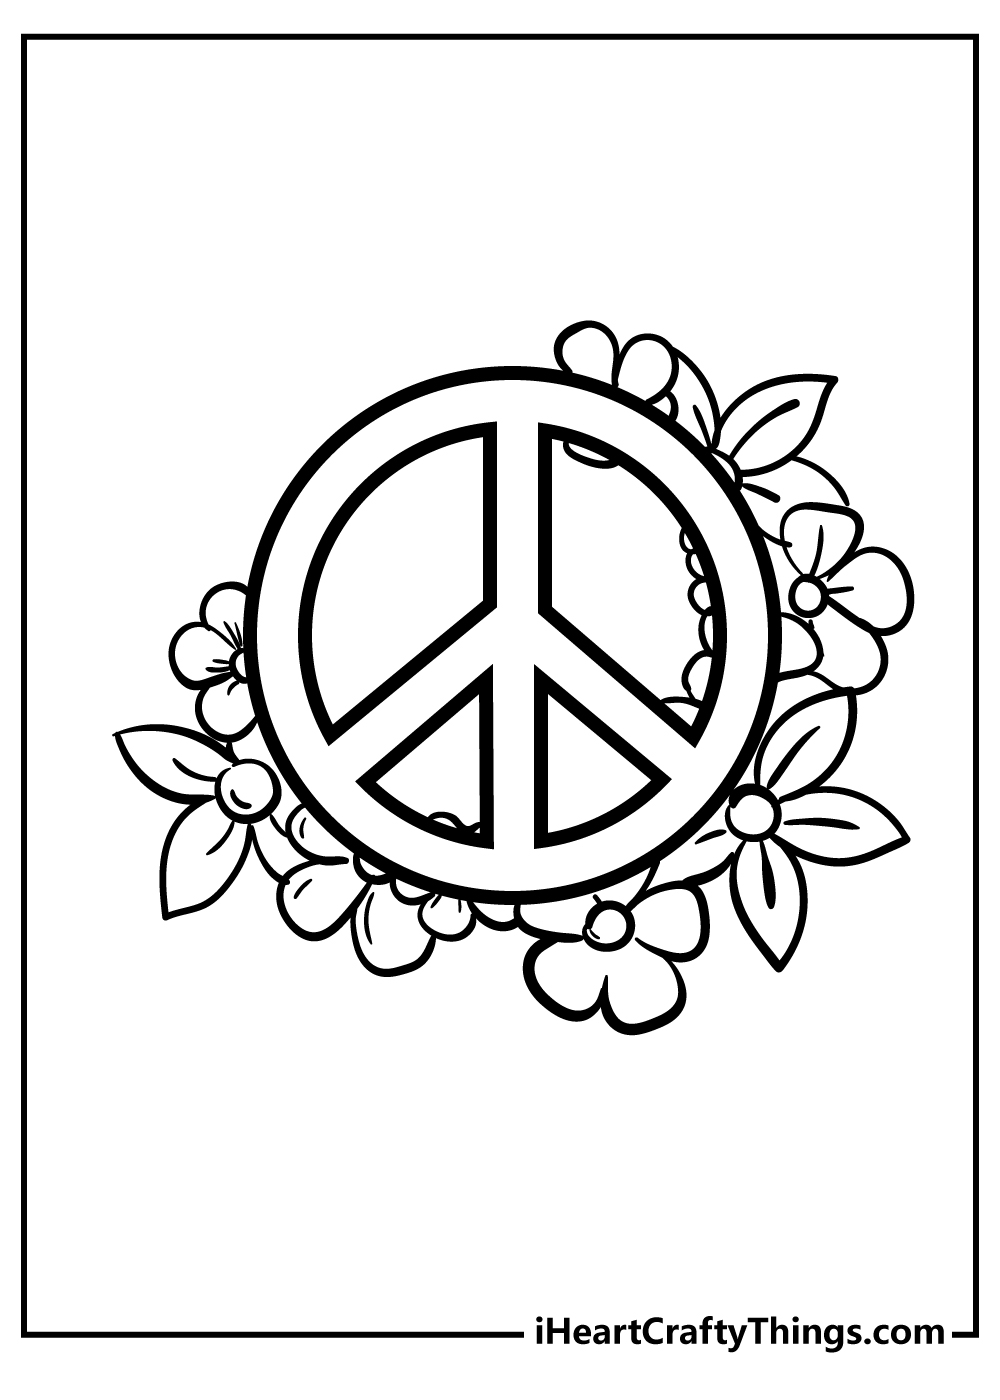 Peace Coloring Pages for kids free download